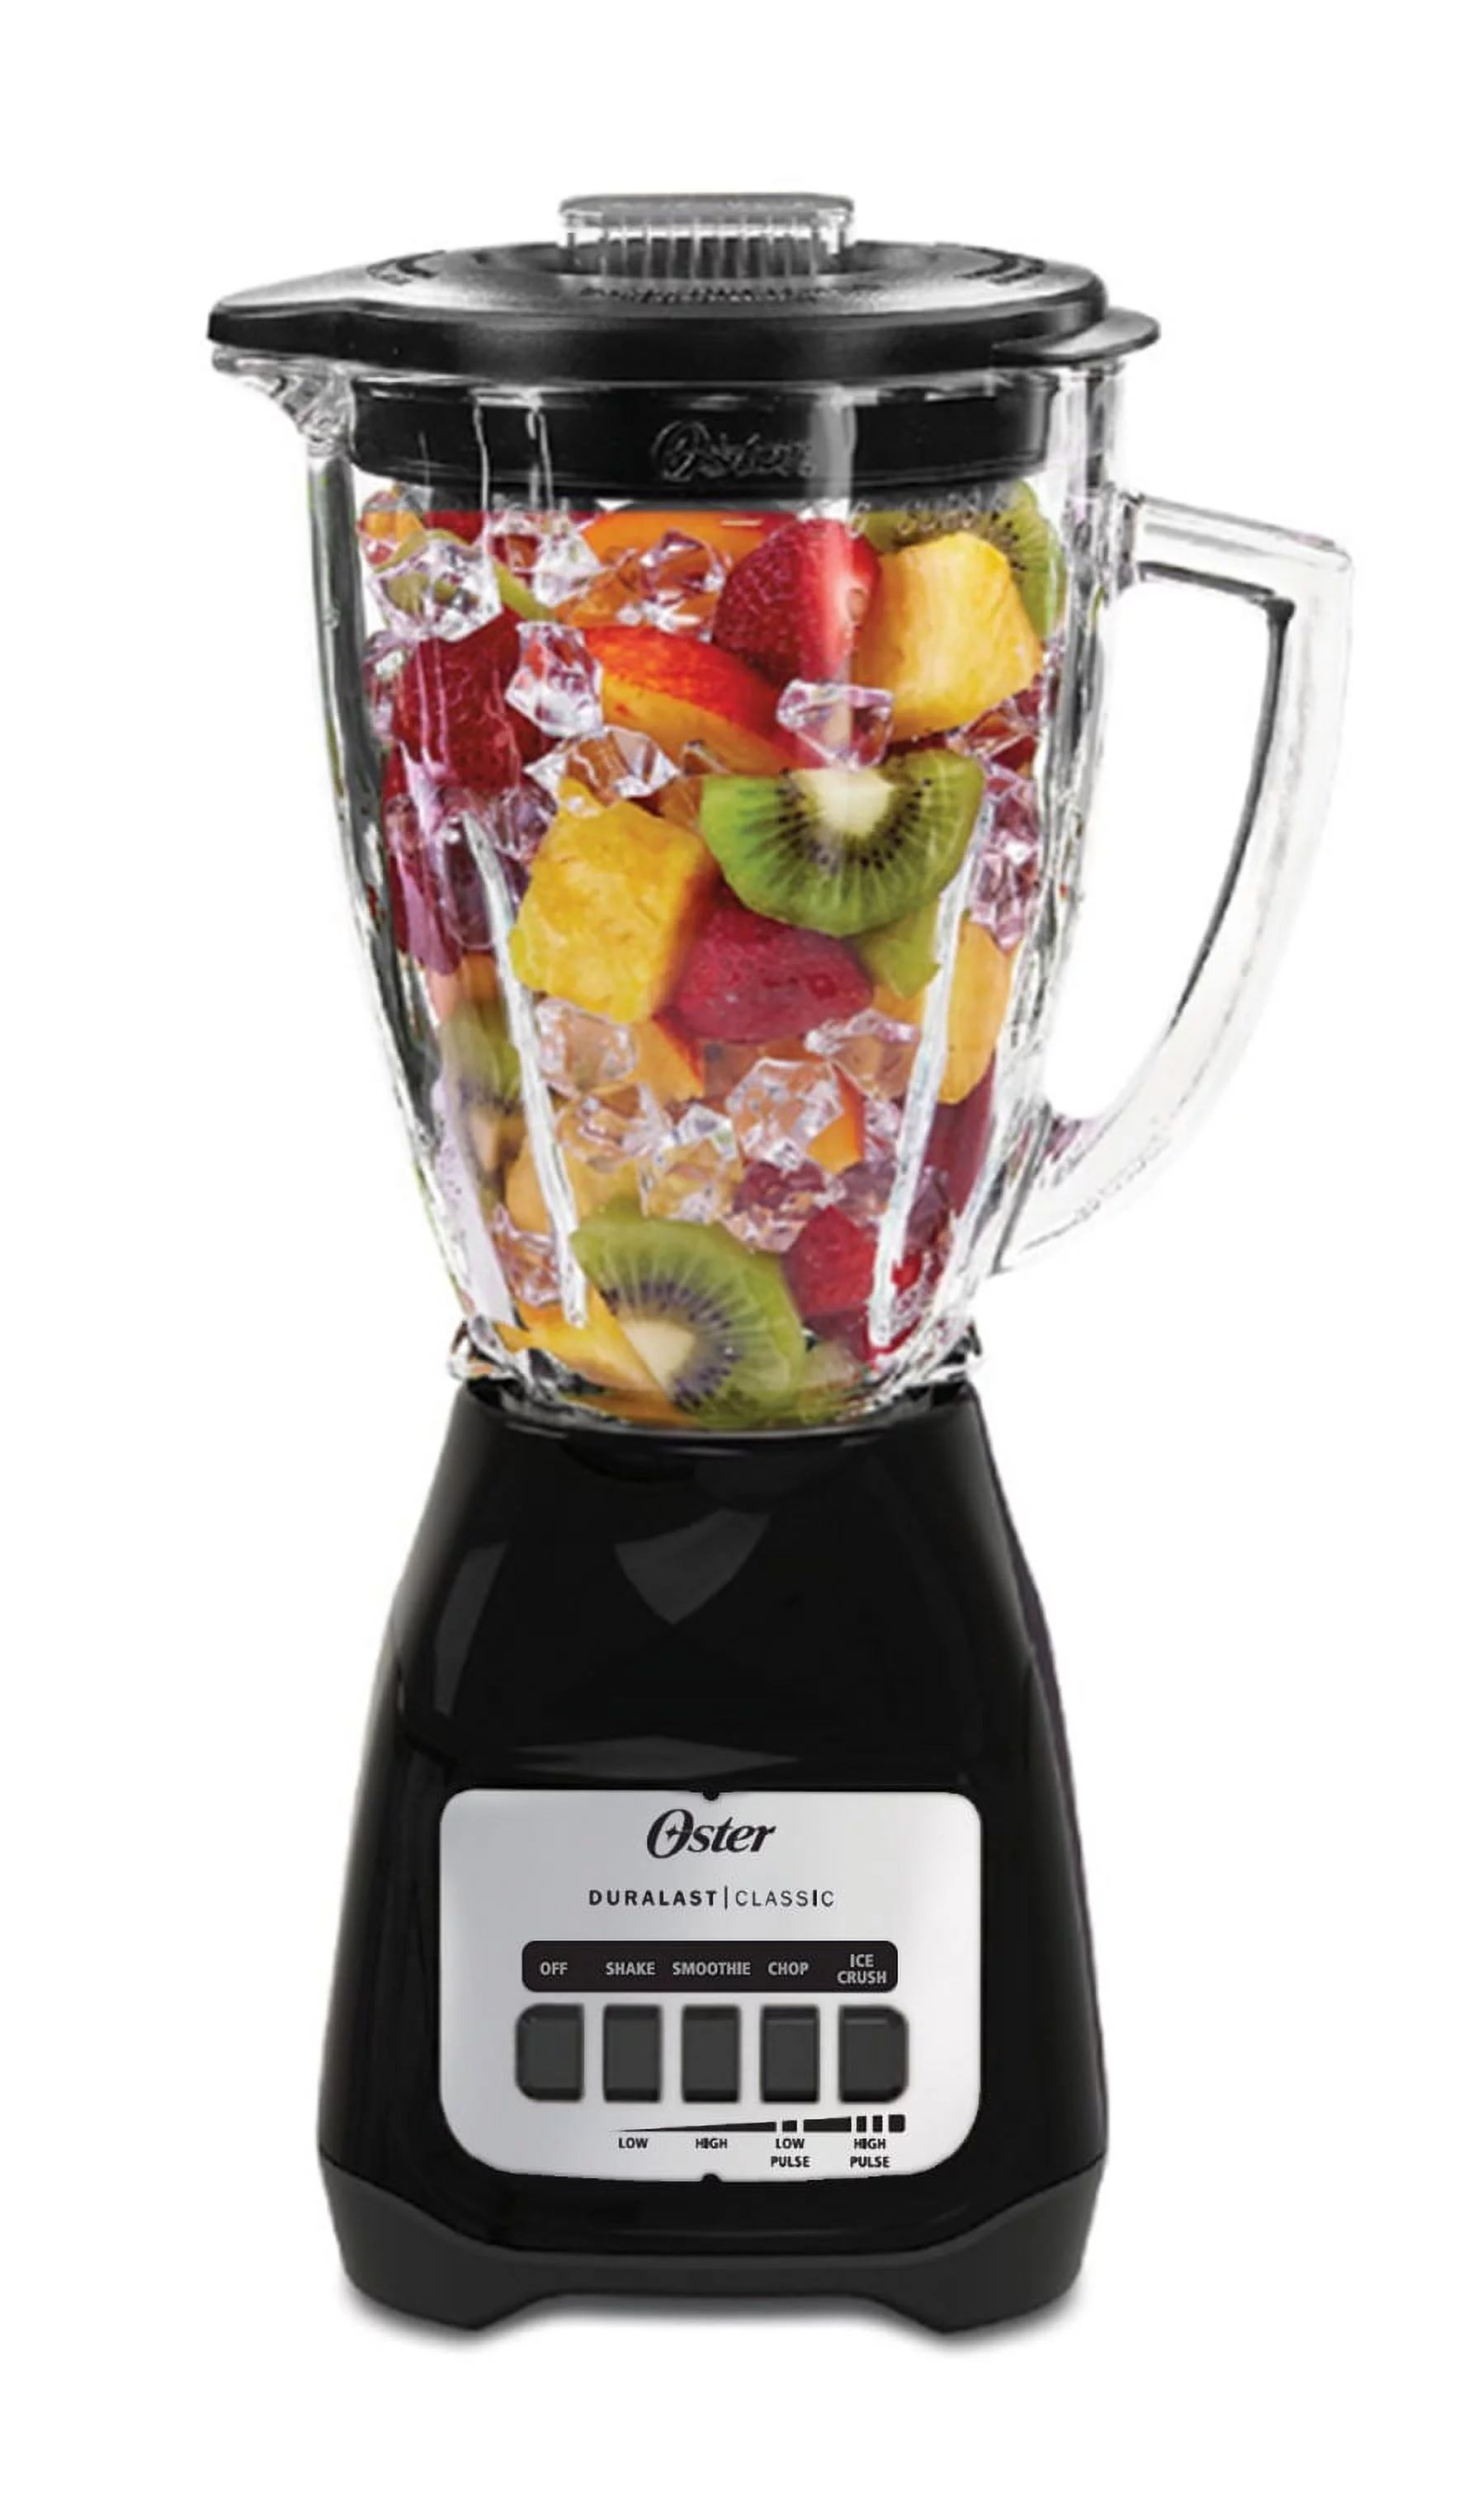 Oster Easy-to-Use Blender with 5-Speeds and 6-Cup Glass Jar, Black | Walmart (US)